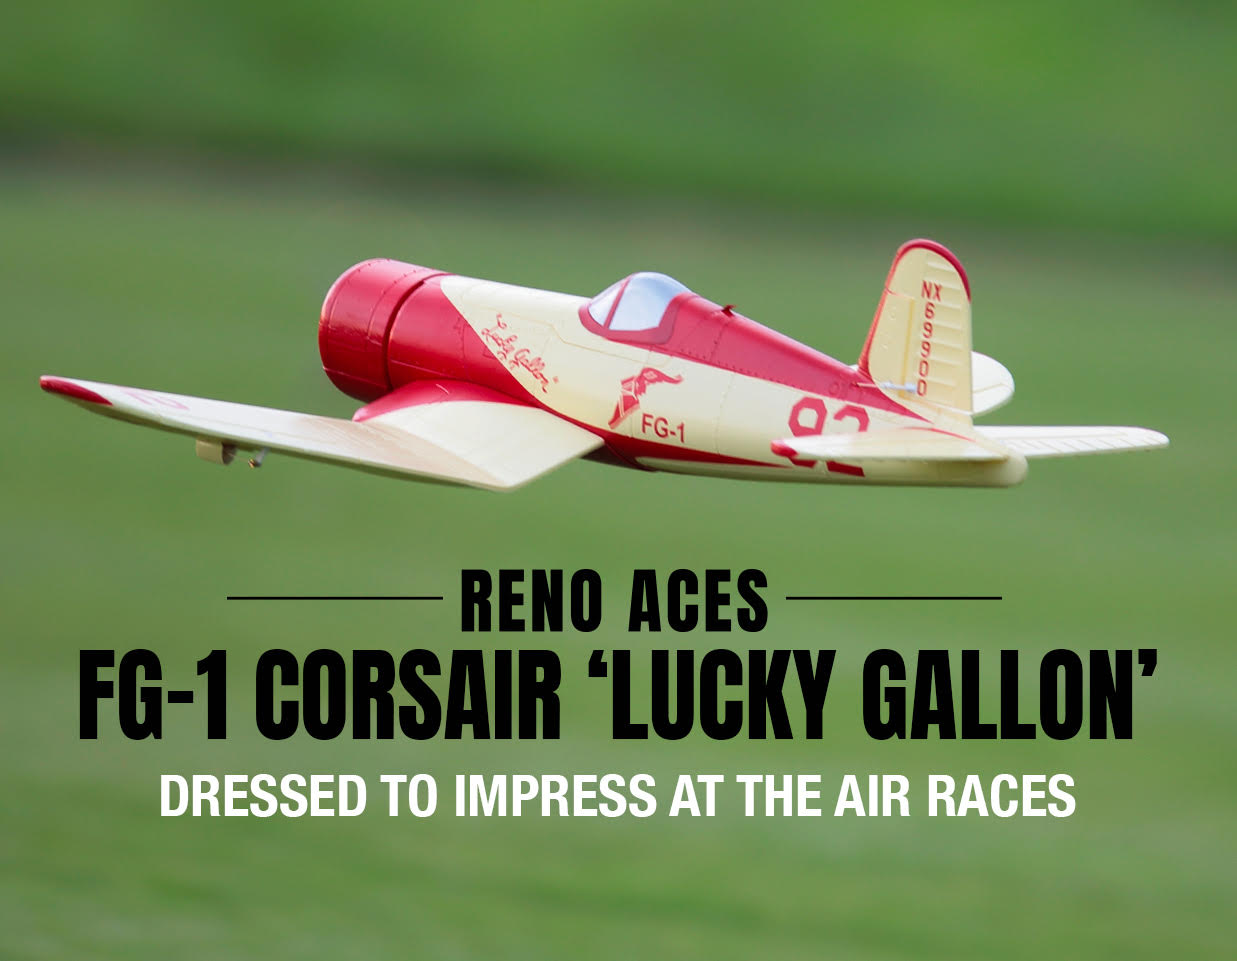 The FG-1 Corsair Lucky Gallon: Dressed to Impress at the Air Races!  